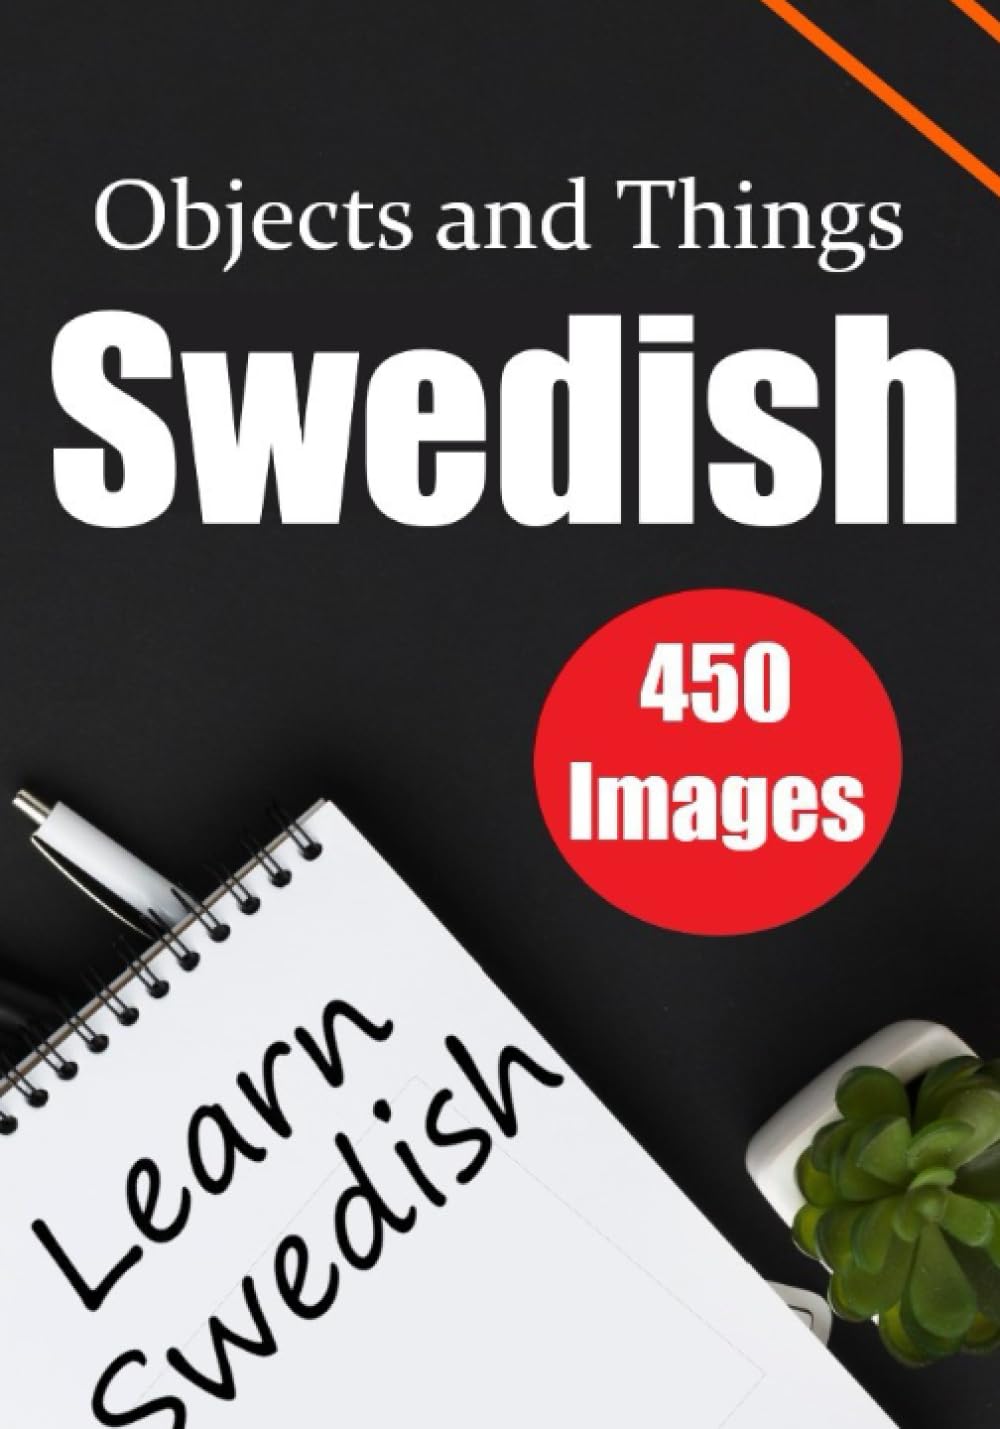 The Swedish Encyclopedia: A Picture Dictionary to Learn 450 Objects and Things in Swedish - Skriuwer.com